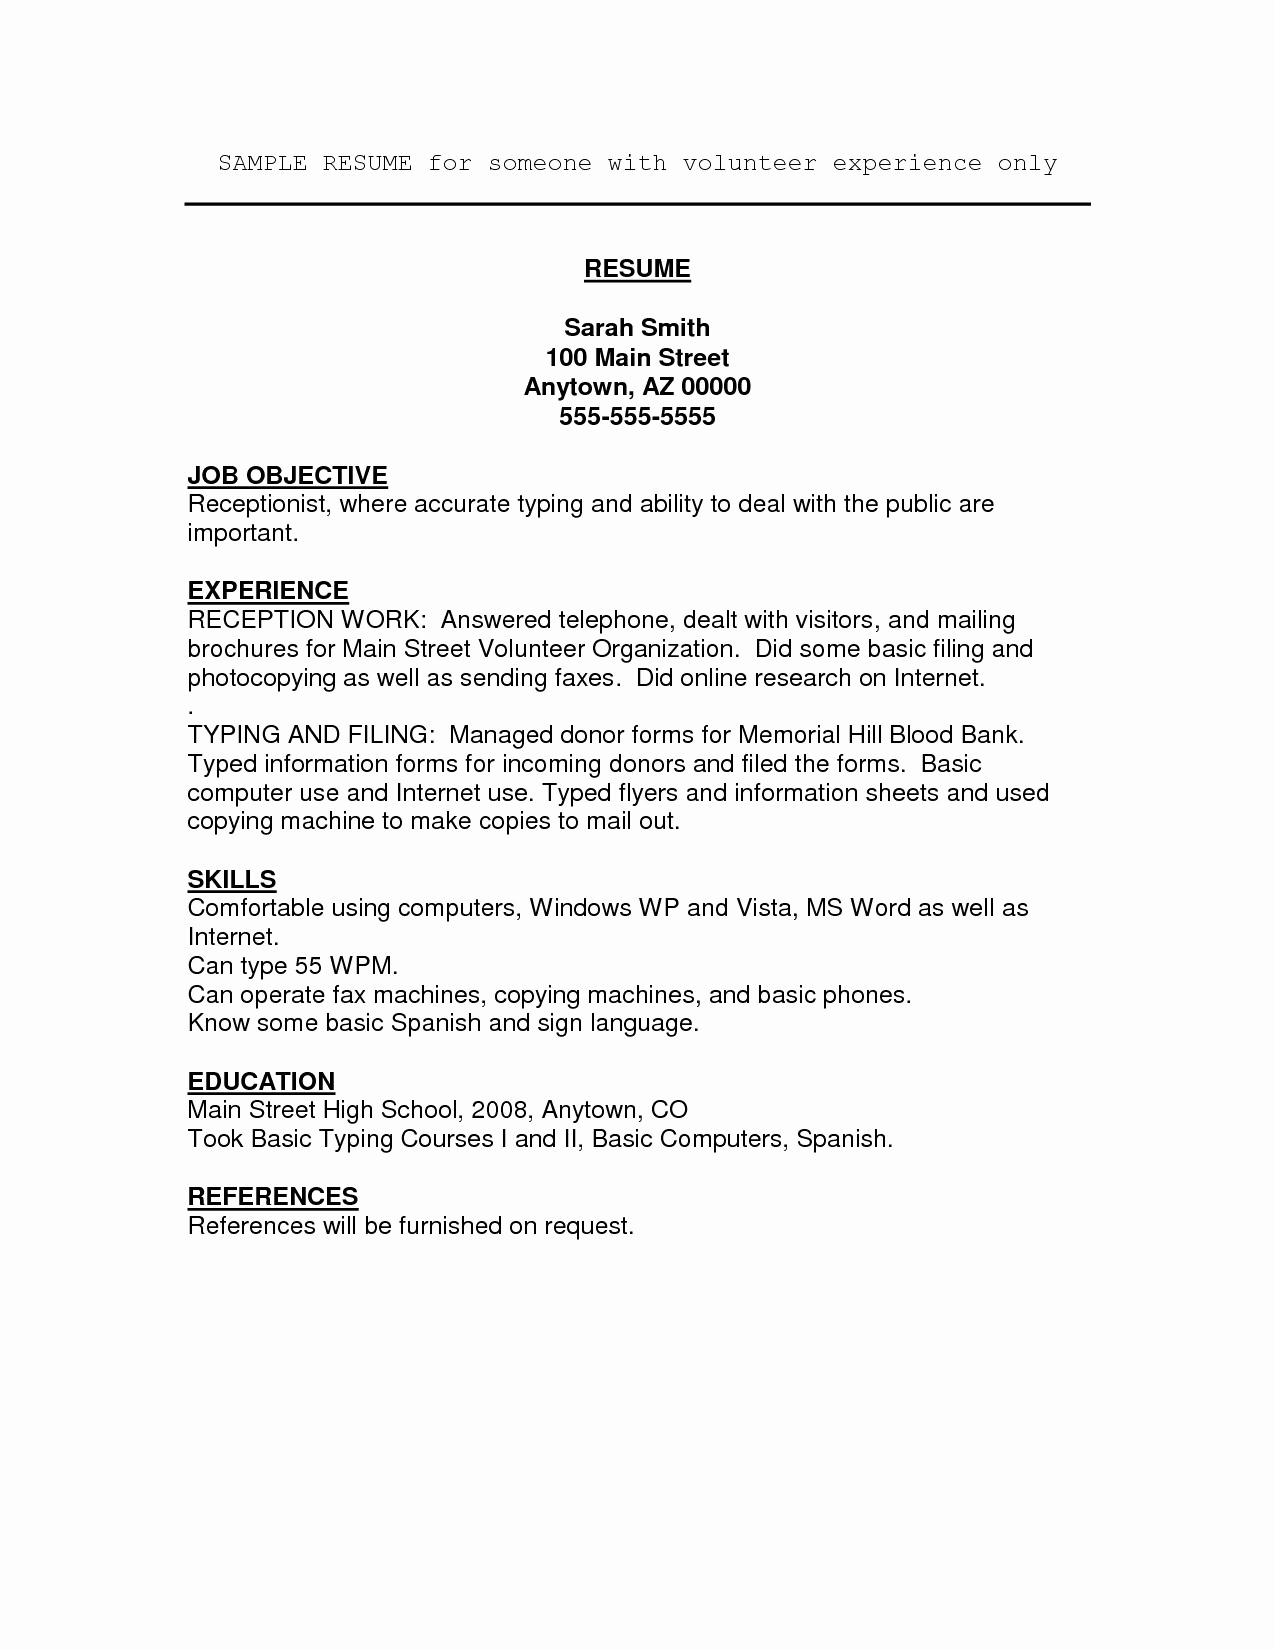 Basic Resume Examples  Cover Letter For Technical Job Beautiful Hairstyles Basic Resume